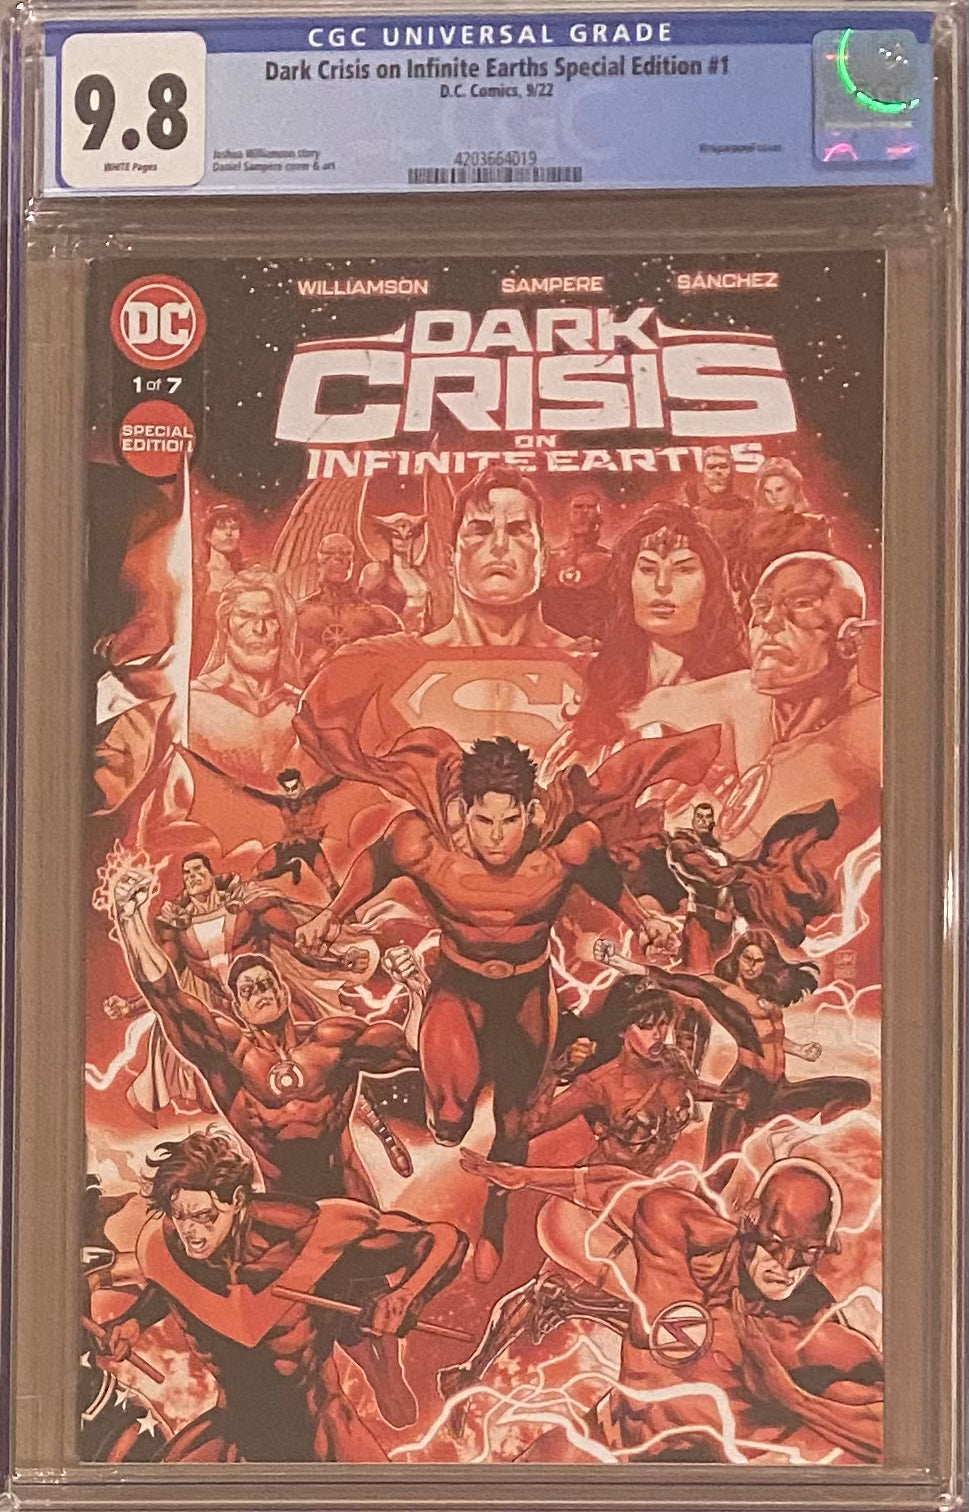 Dark Crisis on Infinite Earths Special Edition #1 CGC 9.8 - DC Promo